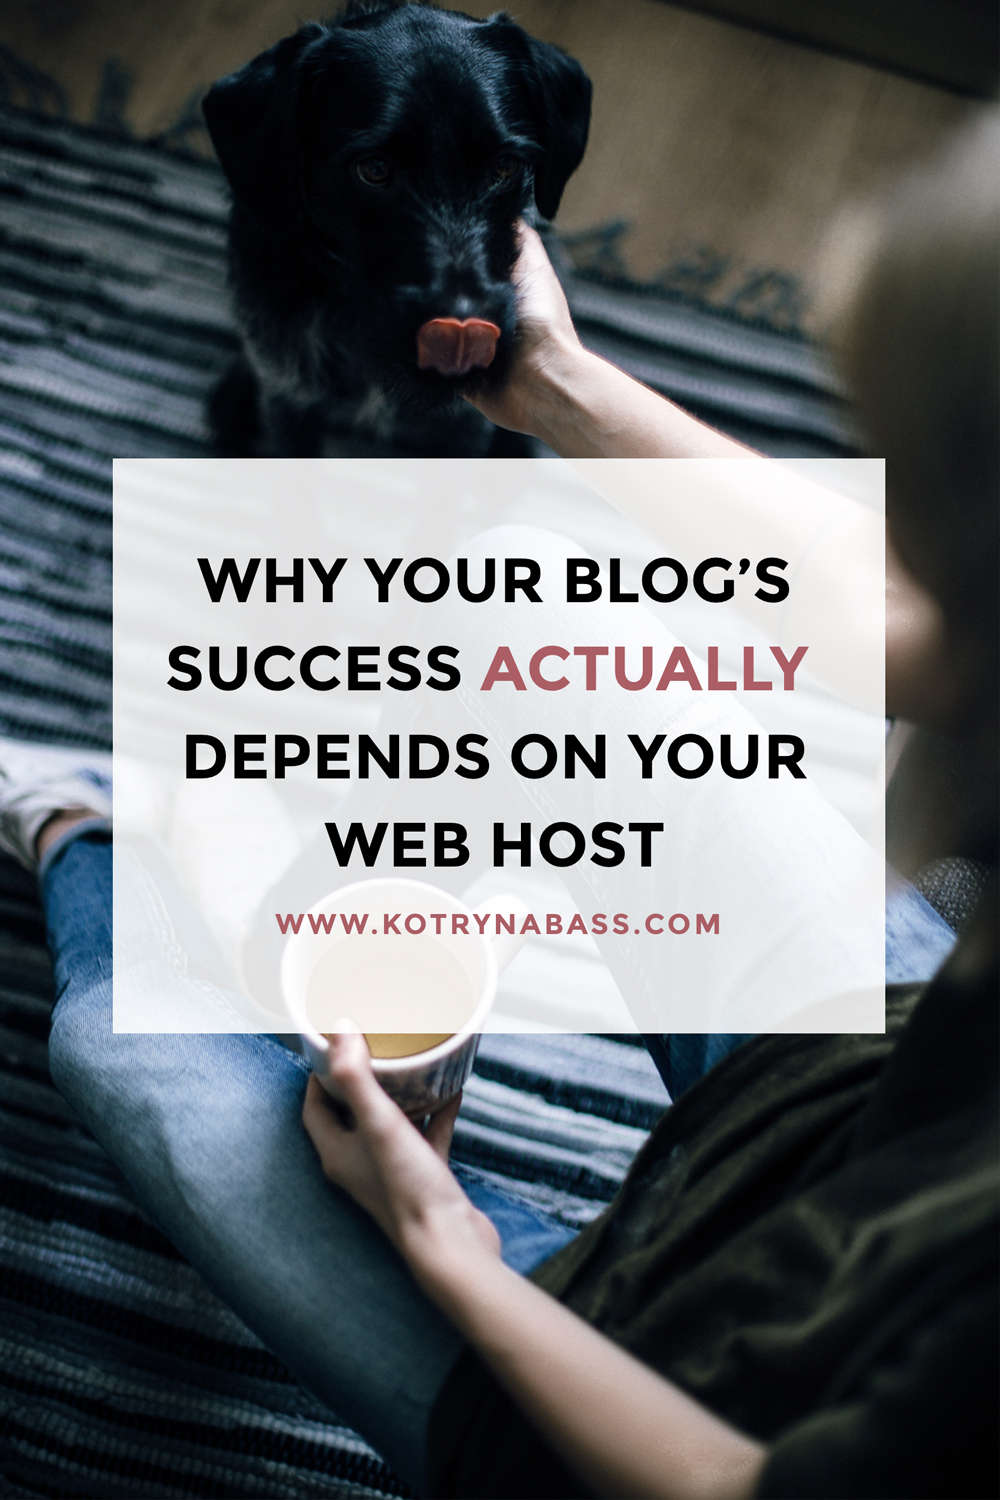 Web Hosting Is Important When It Comes To Your Blog's Success